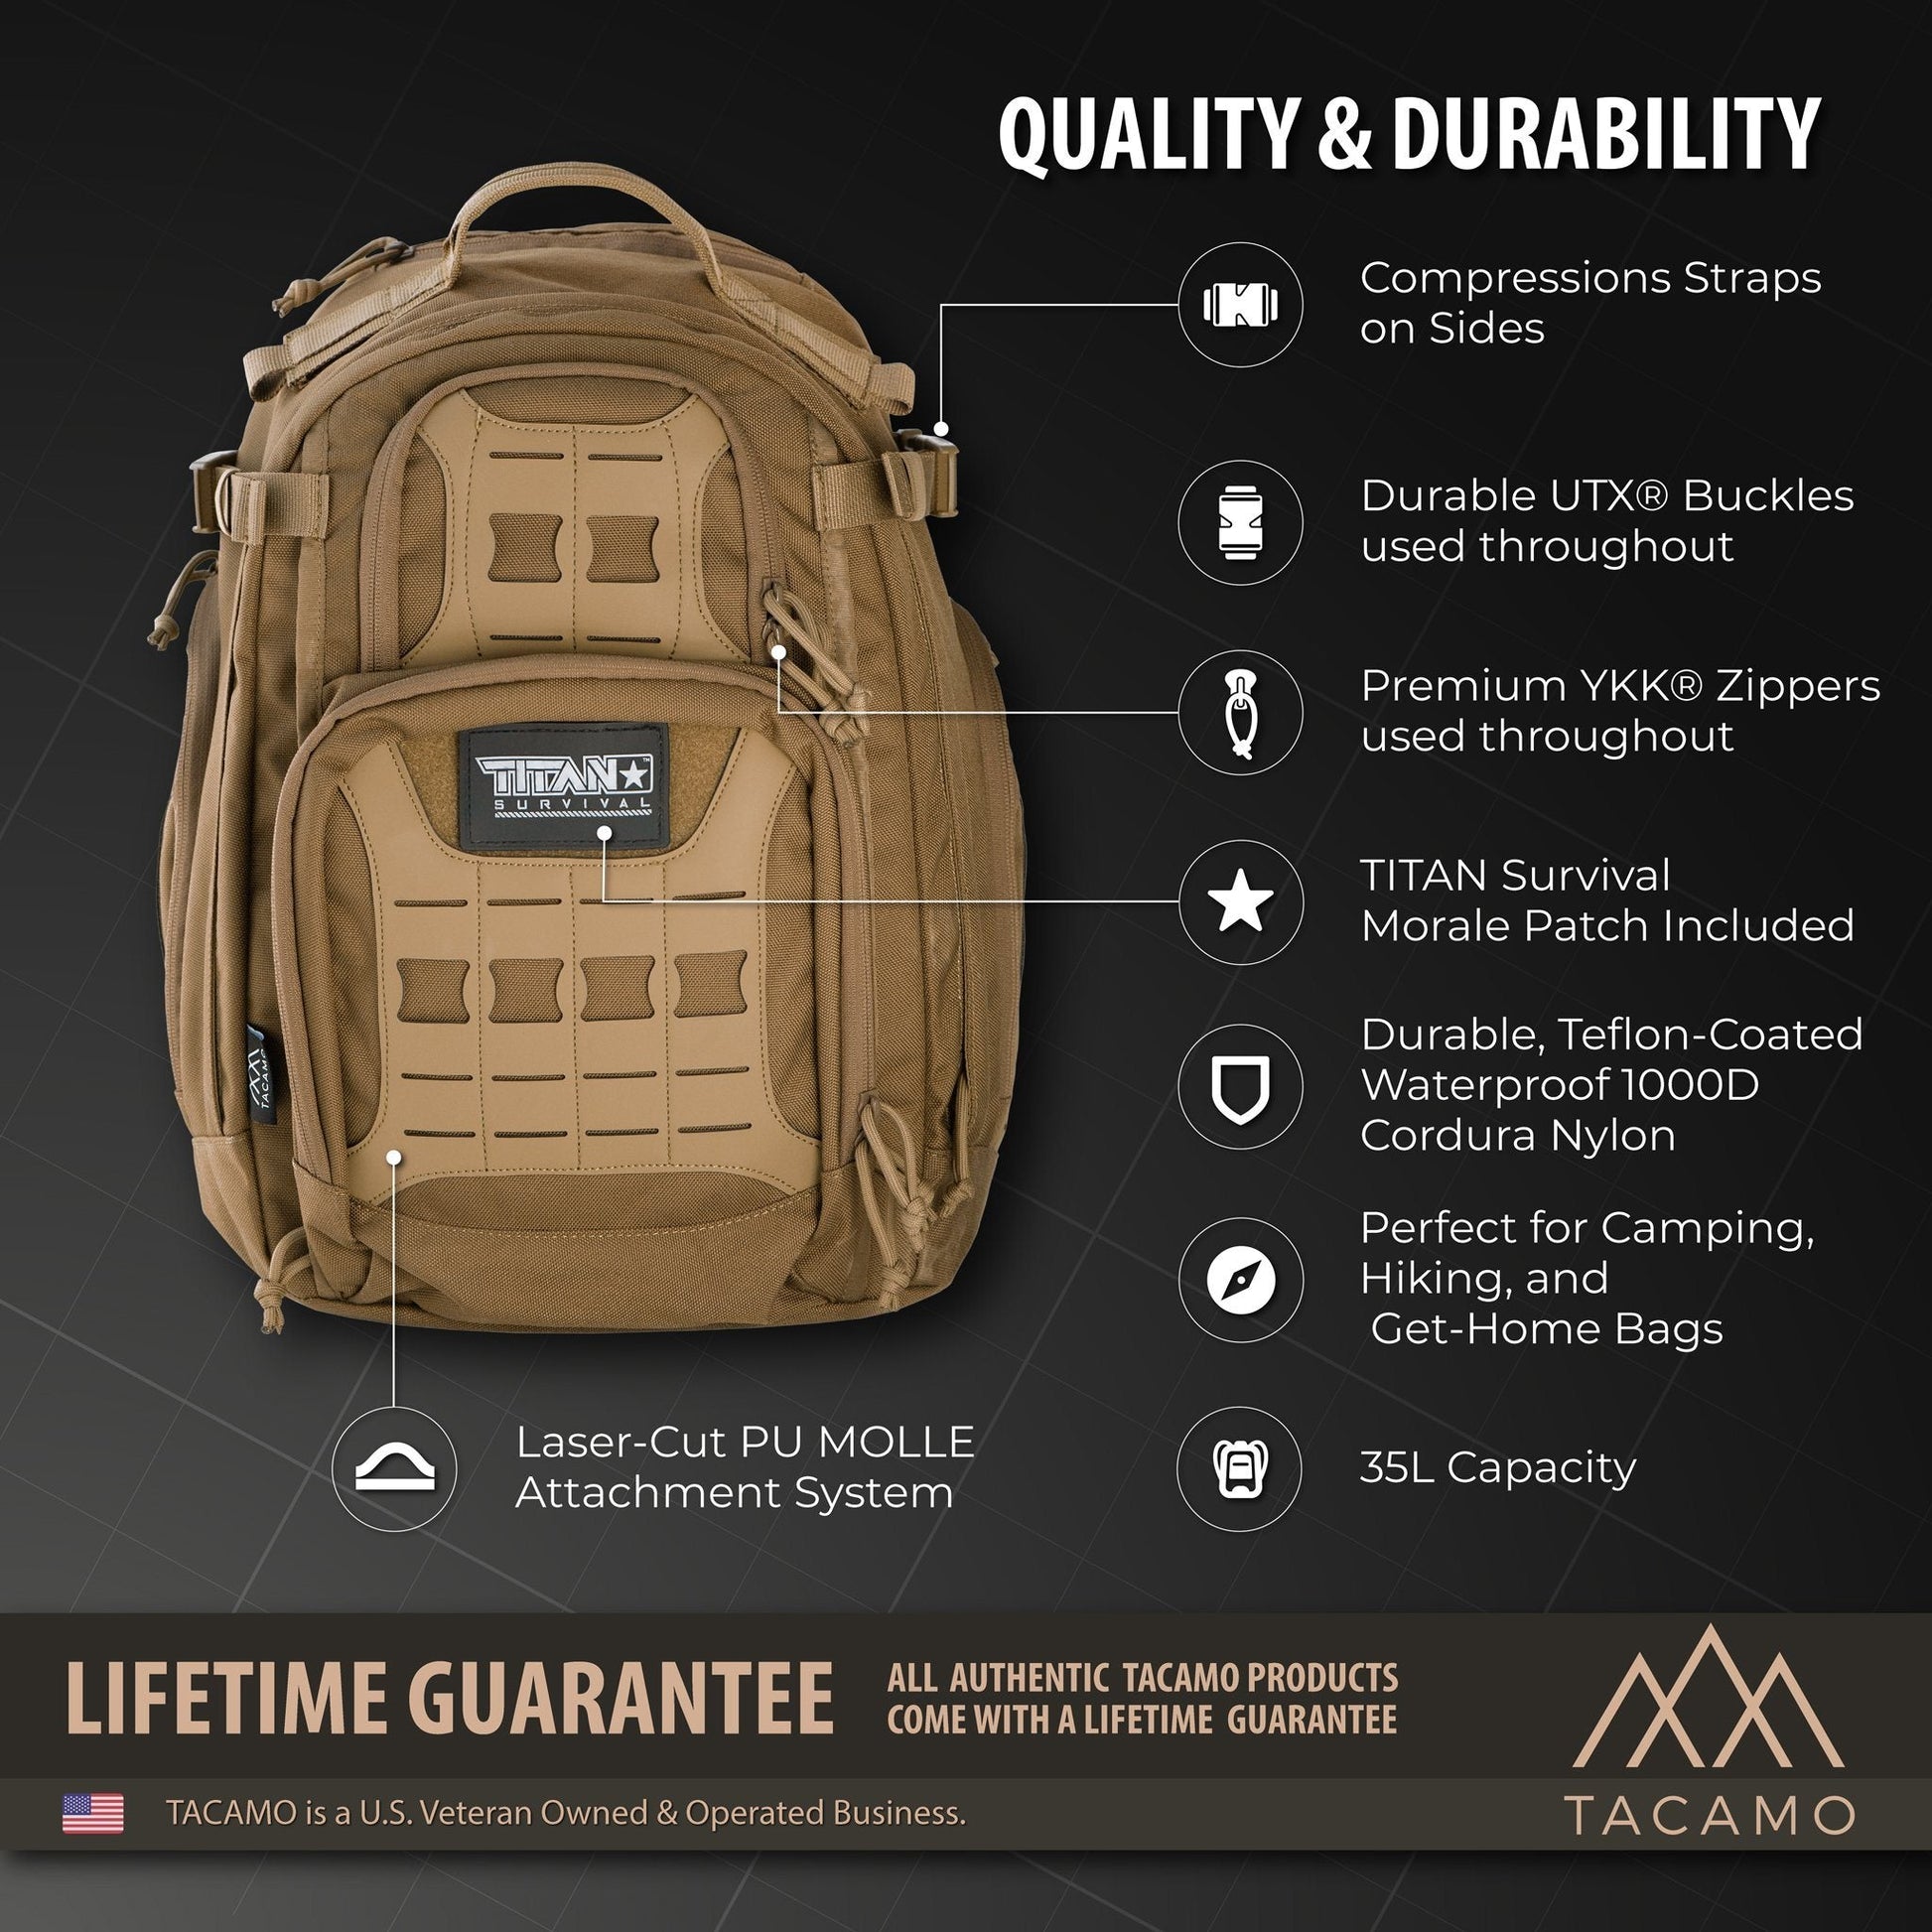 The GH35 35L Tactical Backpack with descriptions of features in detailed format